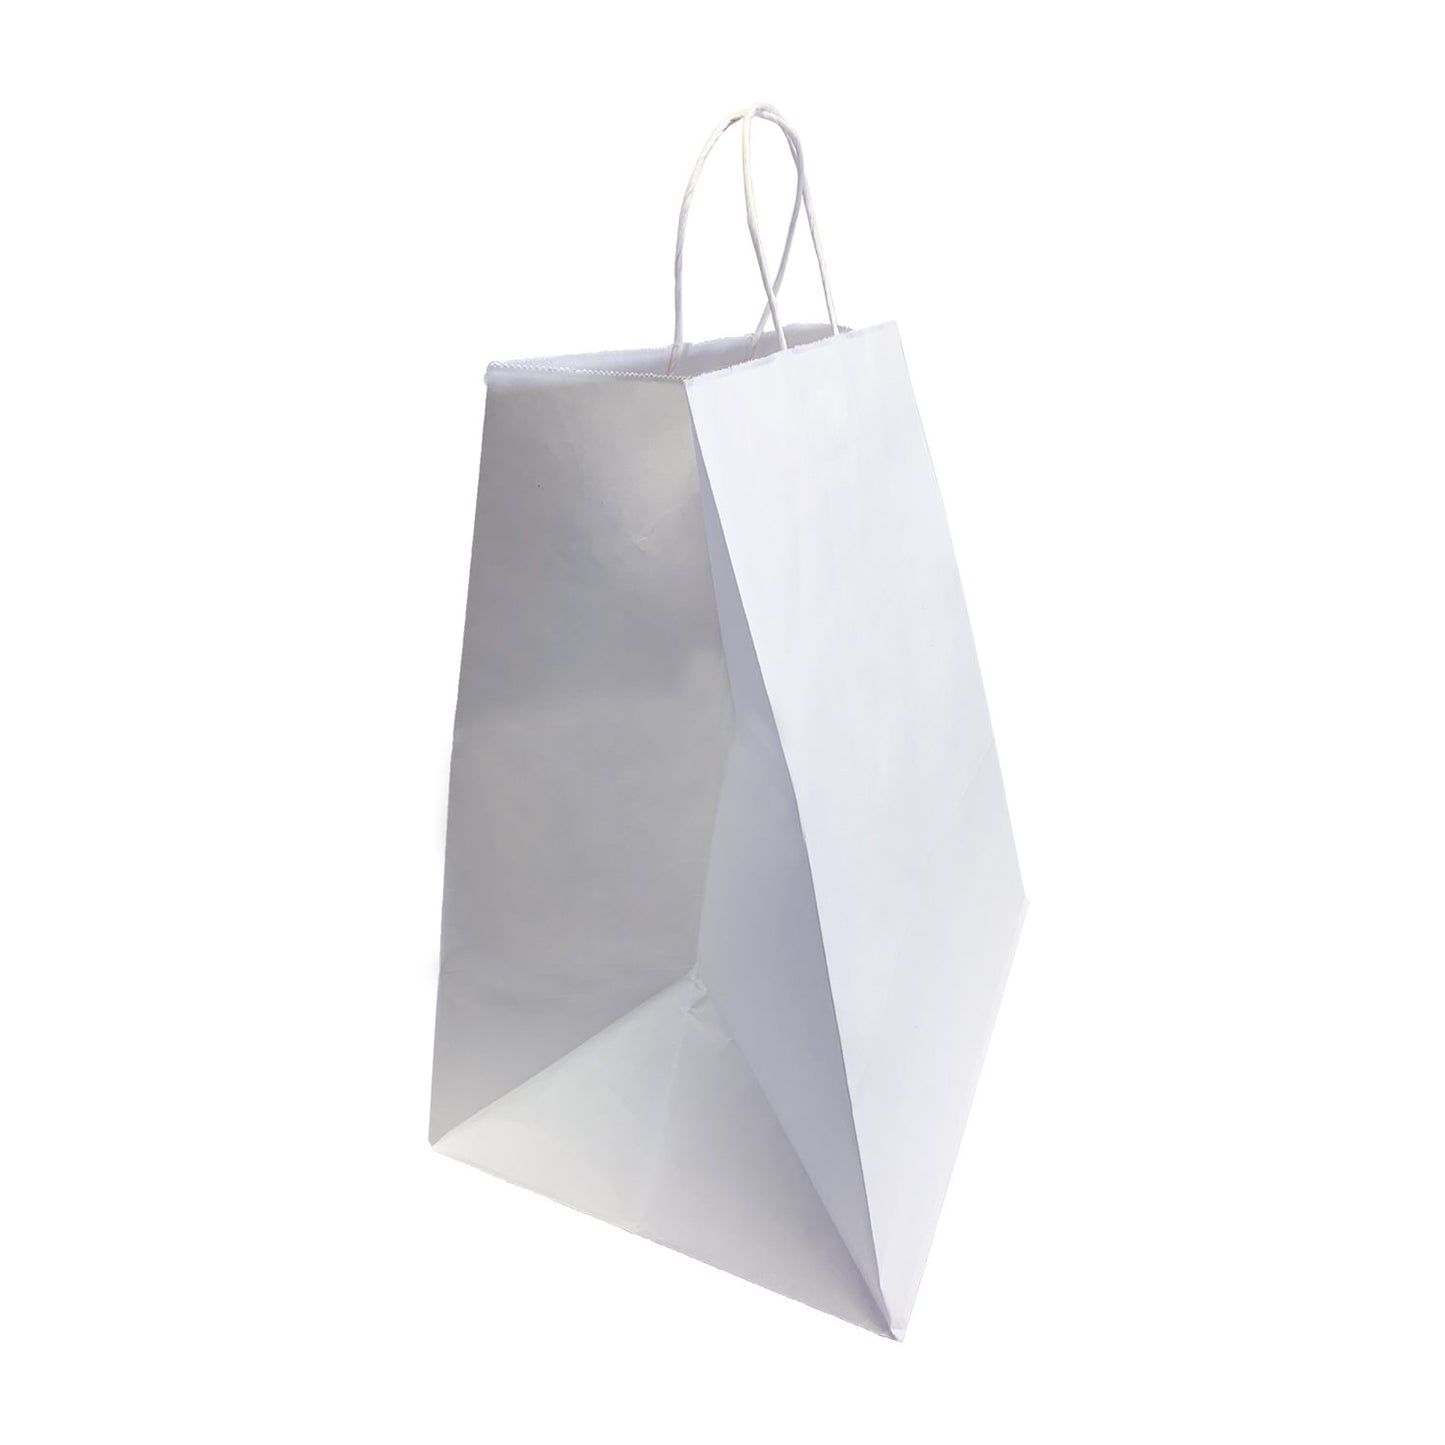 200 Pcs, Super Royal, 14x10x15.75 inches, White Kraft Paper Bags, with Twisted Handle